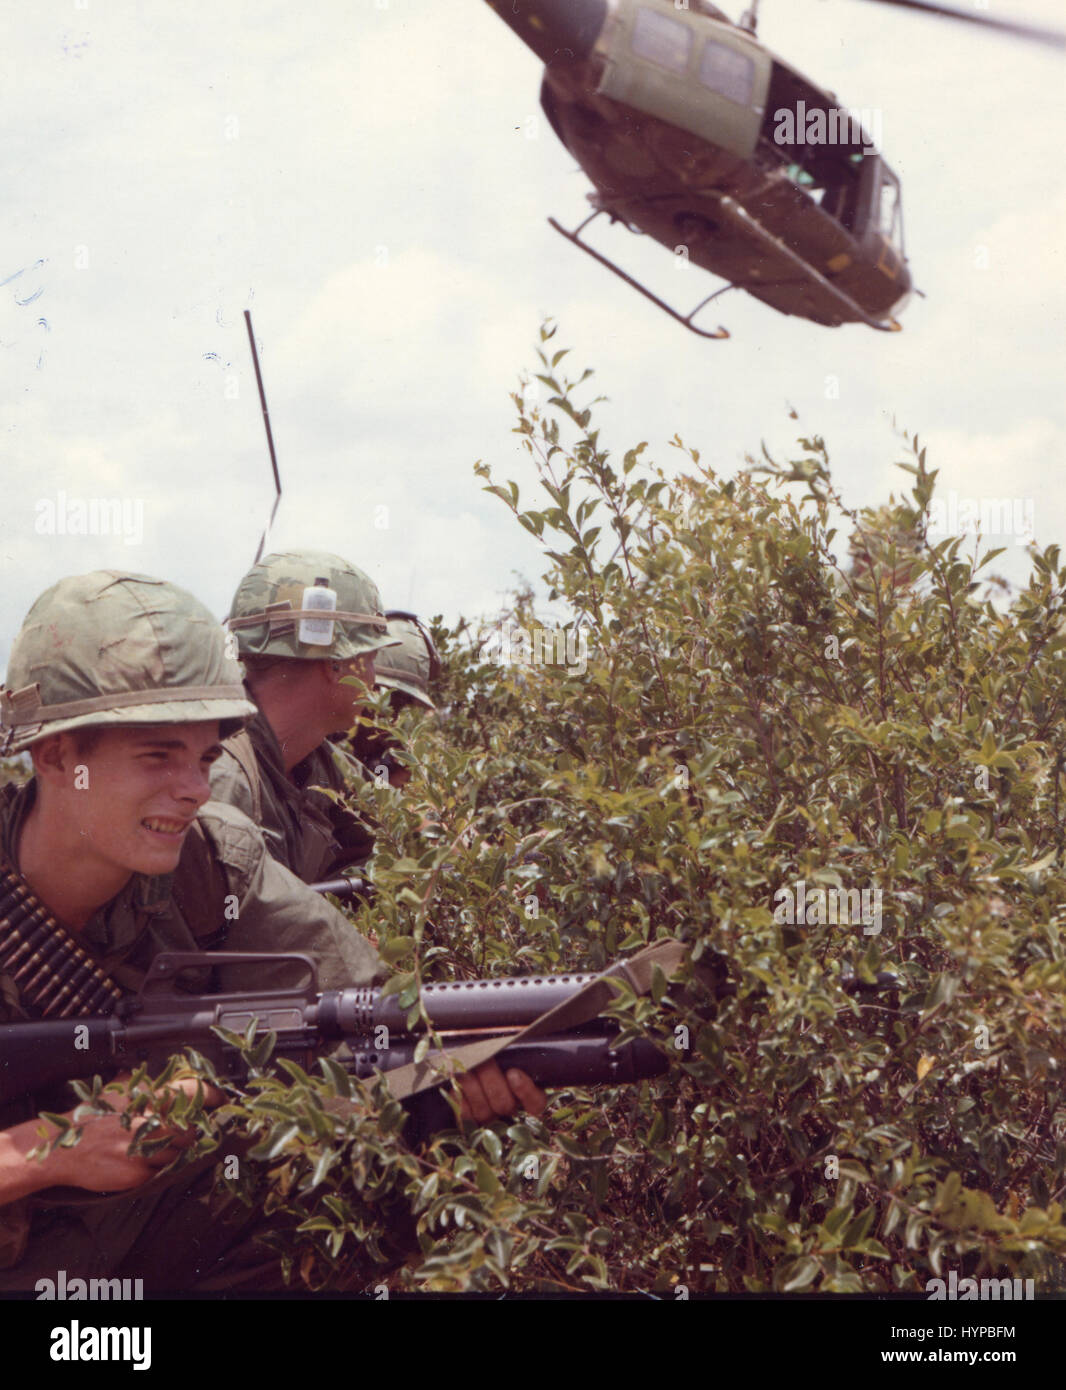 During a mission conducted by a U.S. Army infantry platoon west of Duc Pho, troops prepare to move out in search of a suspected Viet Cong outpost as a Huey takes off, Vietnam, April 24, 1967. Stock Photo